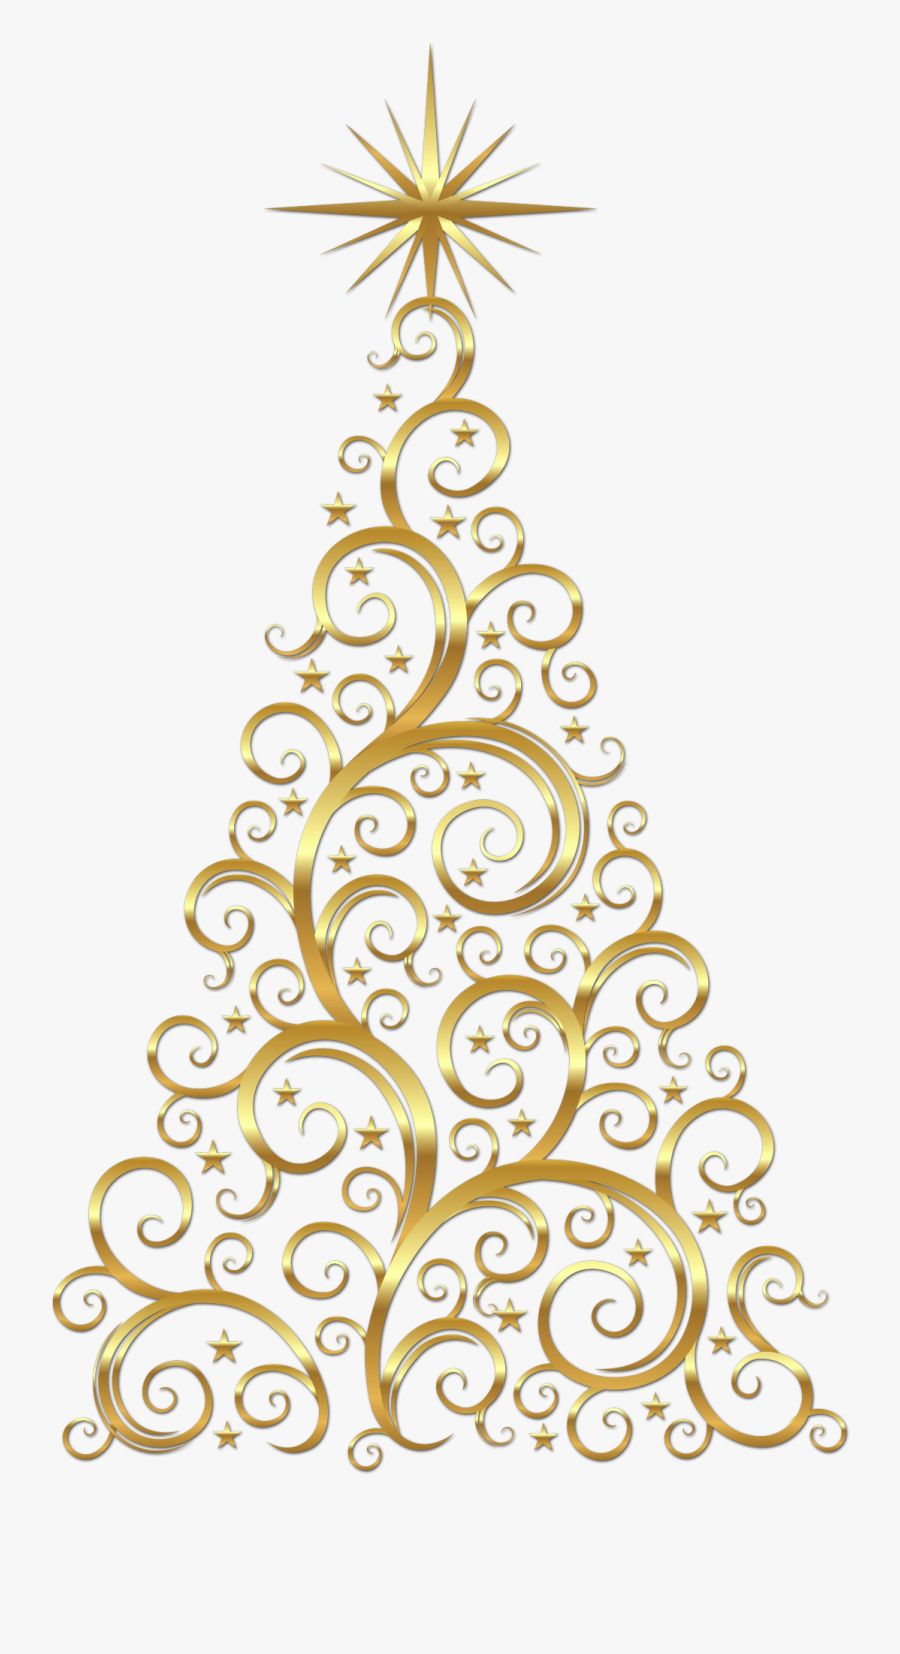 Gold Scroll Christmas Tree - Gold Christmas Tree Clipart, Transparent Clipart